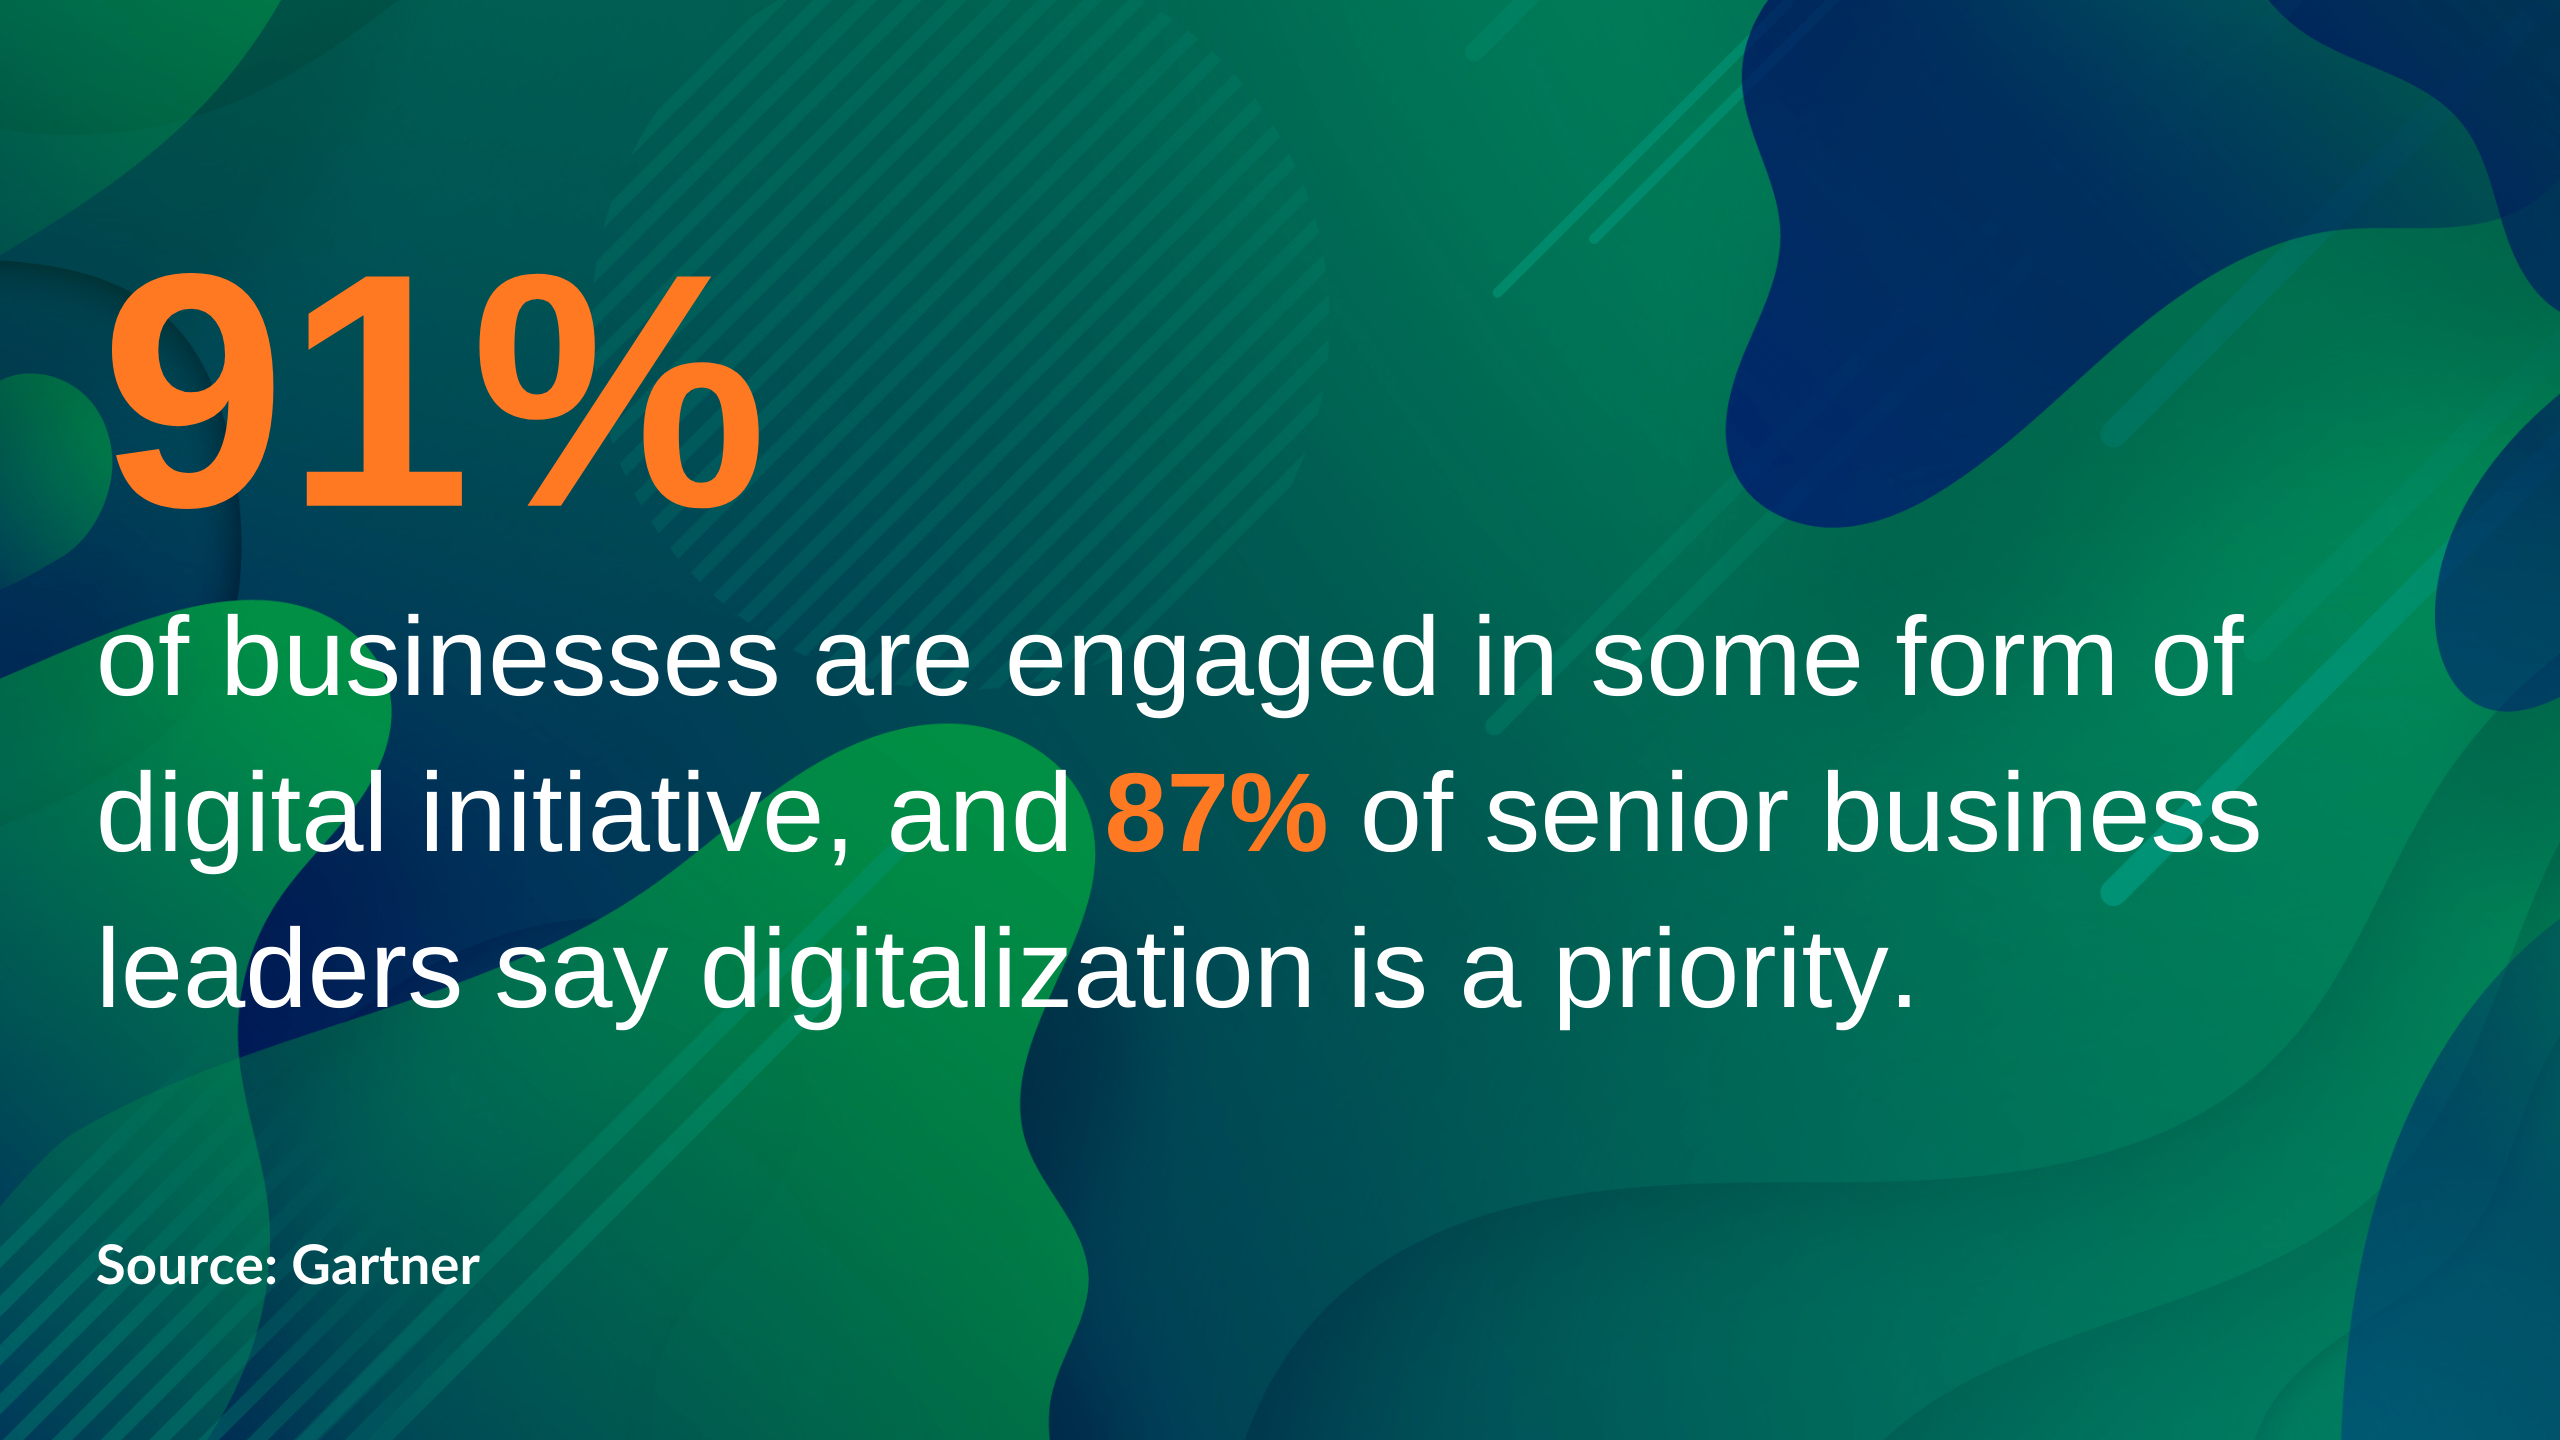 91% of businesses are engaged in some form of digital initiative, and 87% of senior business leaders say digitalization is a priority.